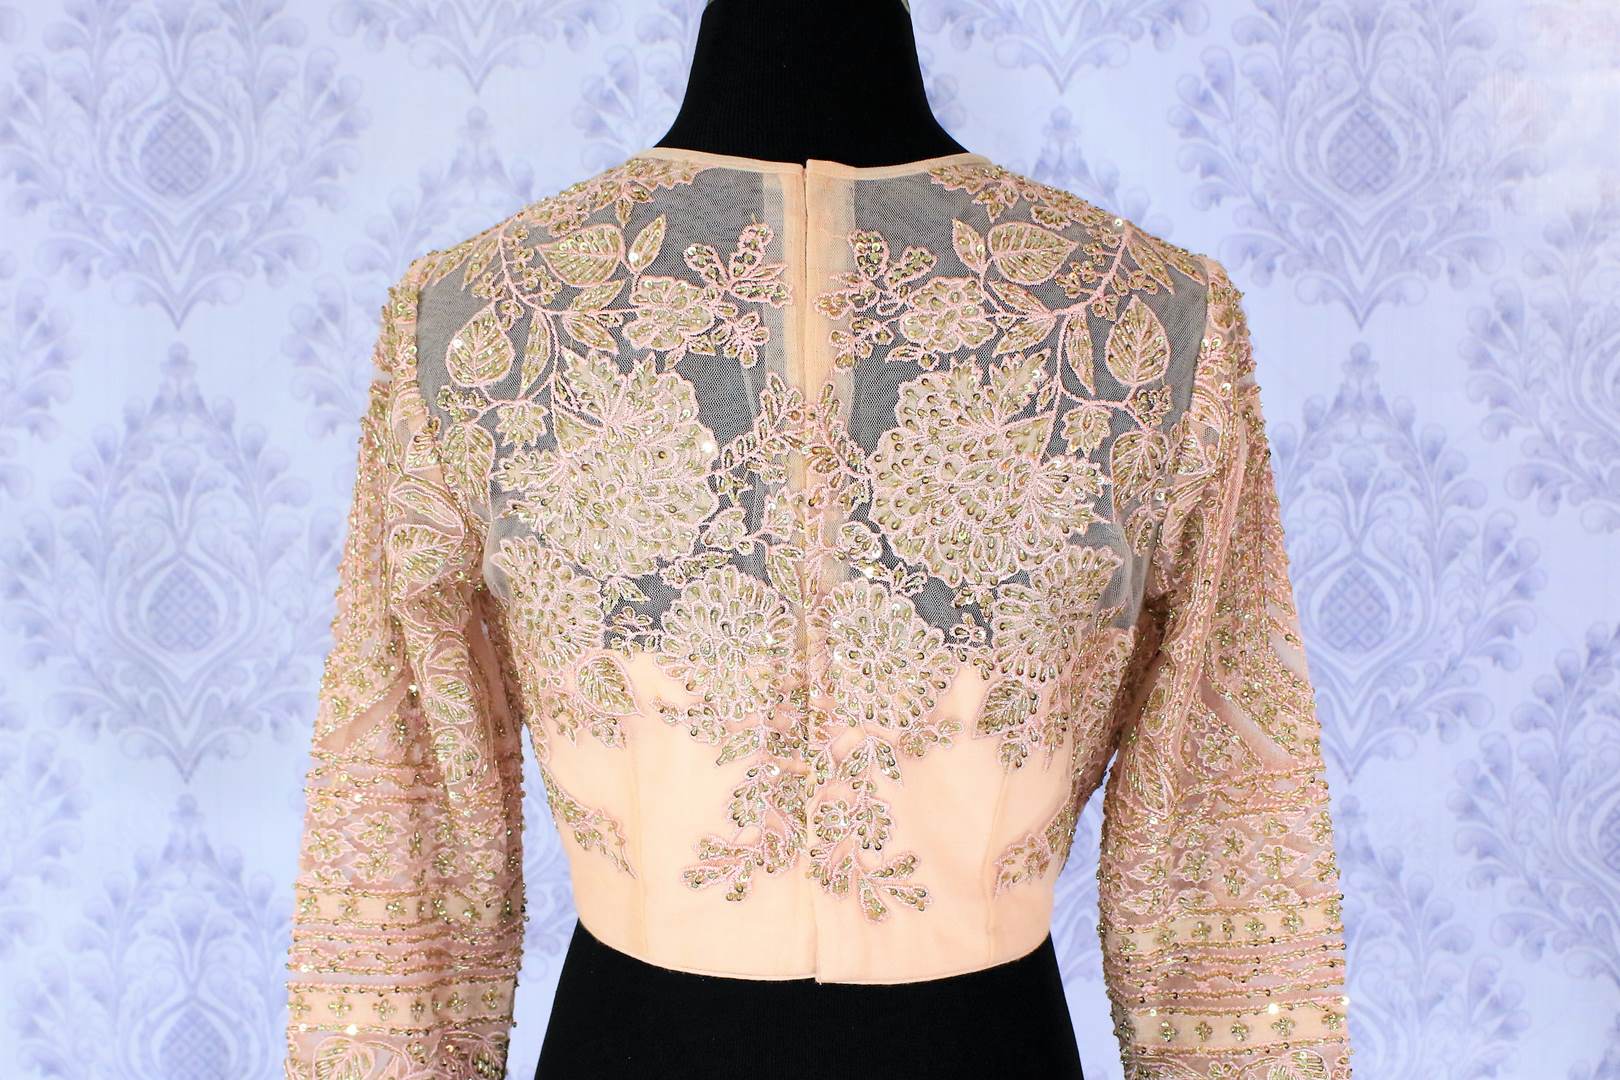 Sizzle like a princess in our exquisitely designed blush pink designer saree blouse with floral embroidery sheer net full sleeve details. The intricately handcrafted modern blouse is your go-to wedding and party must-have. Shop beautiful designer blouses online or visit Pure Elegance store in USA. -back